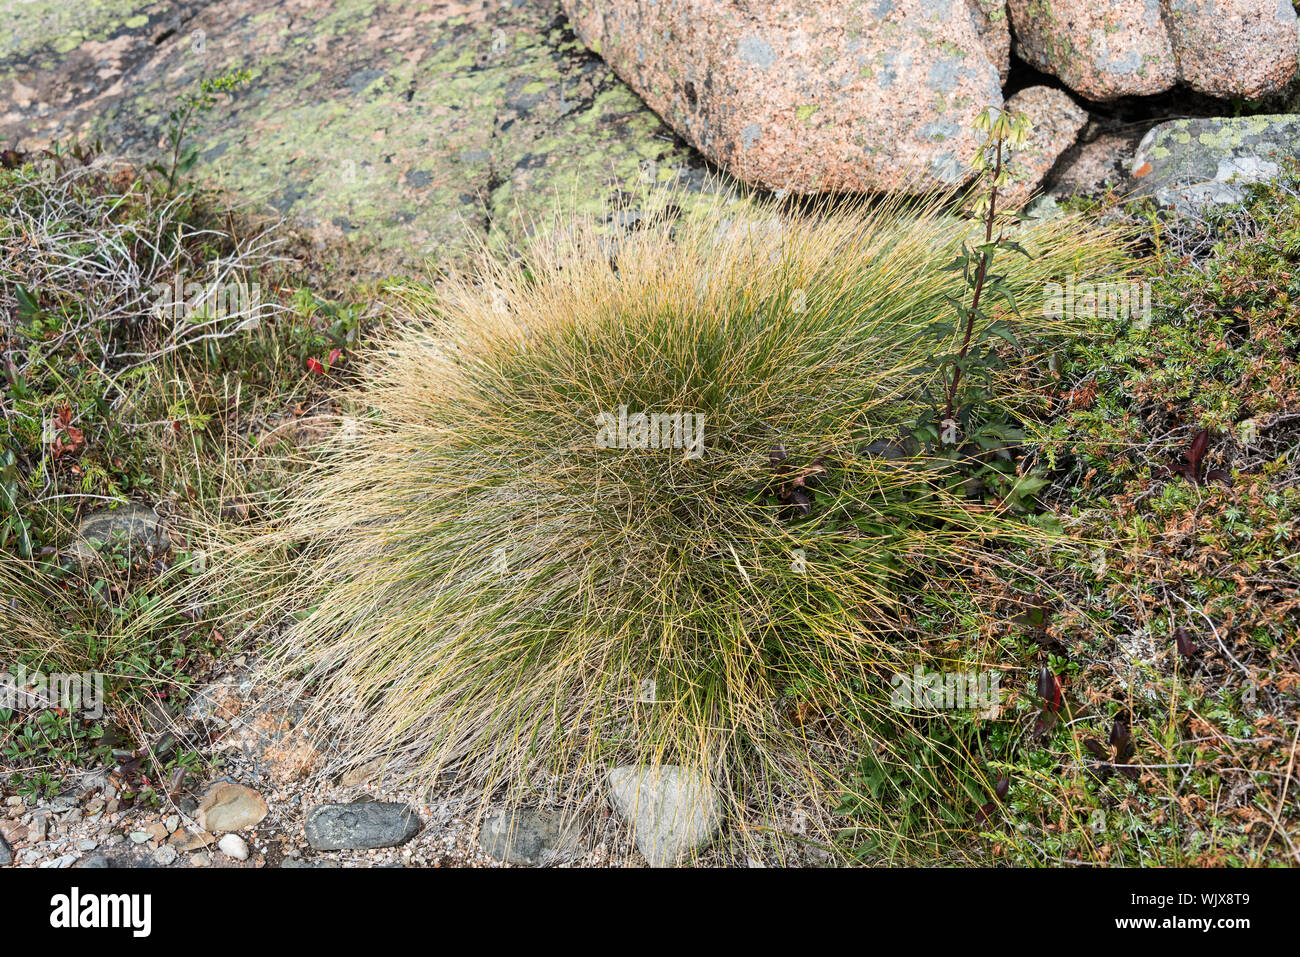 Tufted  Club-rush (Trichophorum cespitosum, also known as Deer's Hair Grass,  on the South Ridge of Cadillac Mountain, Acadia National Park, Maine. Stock Photo